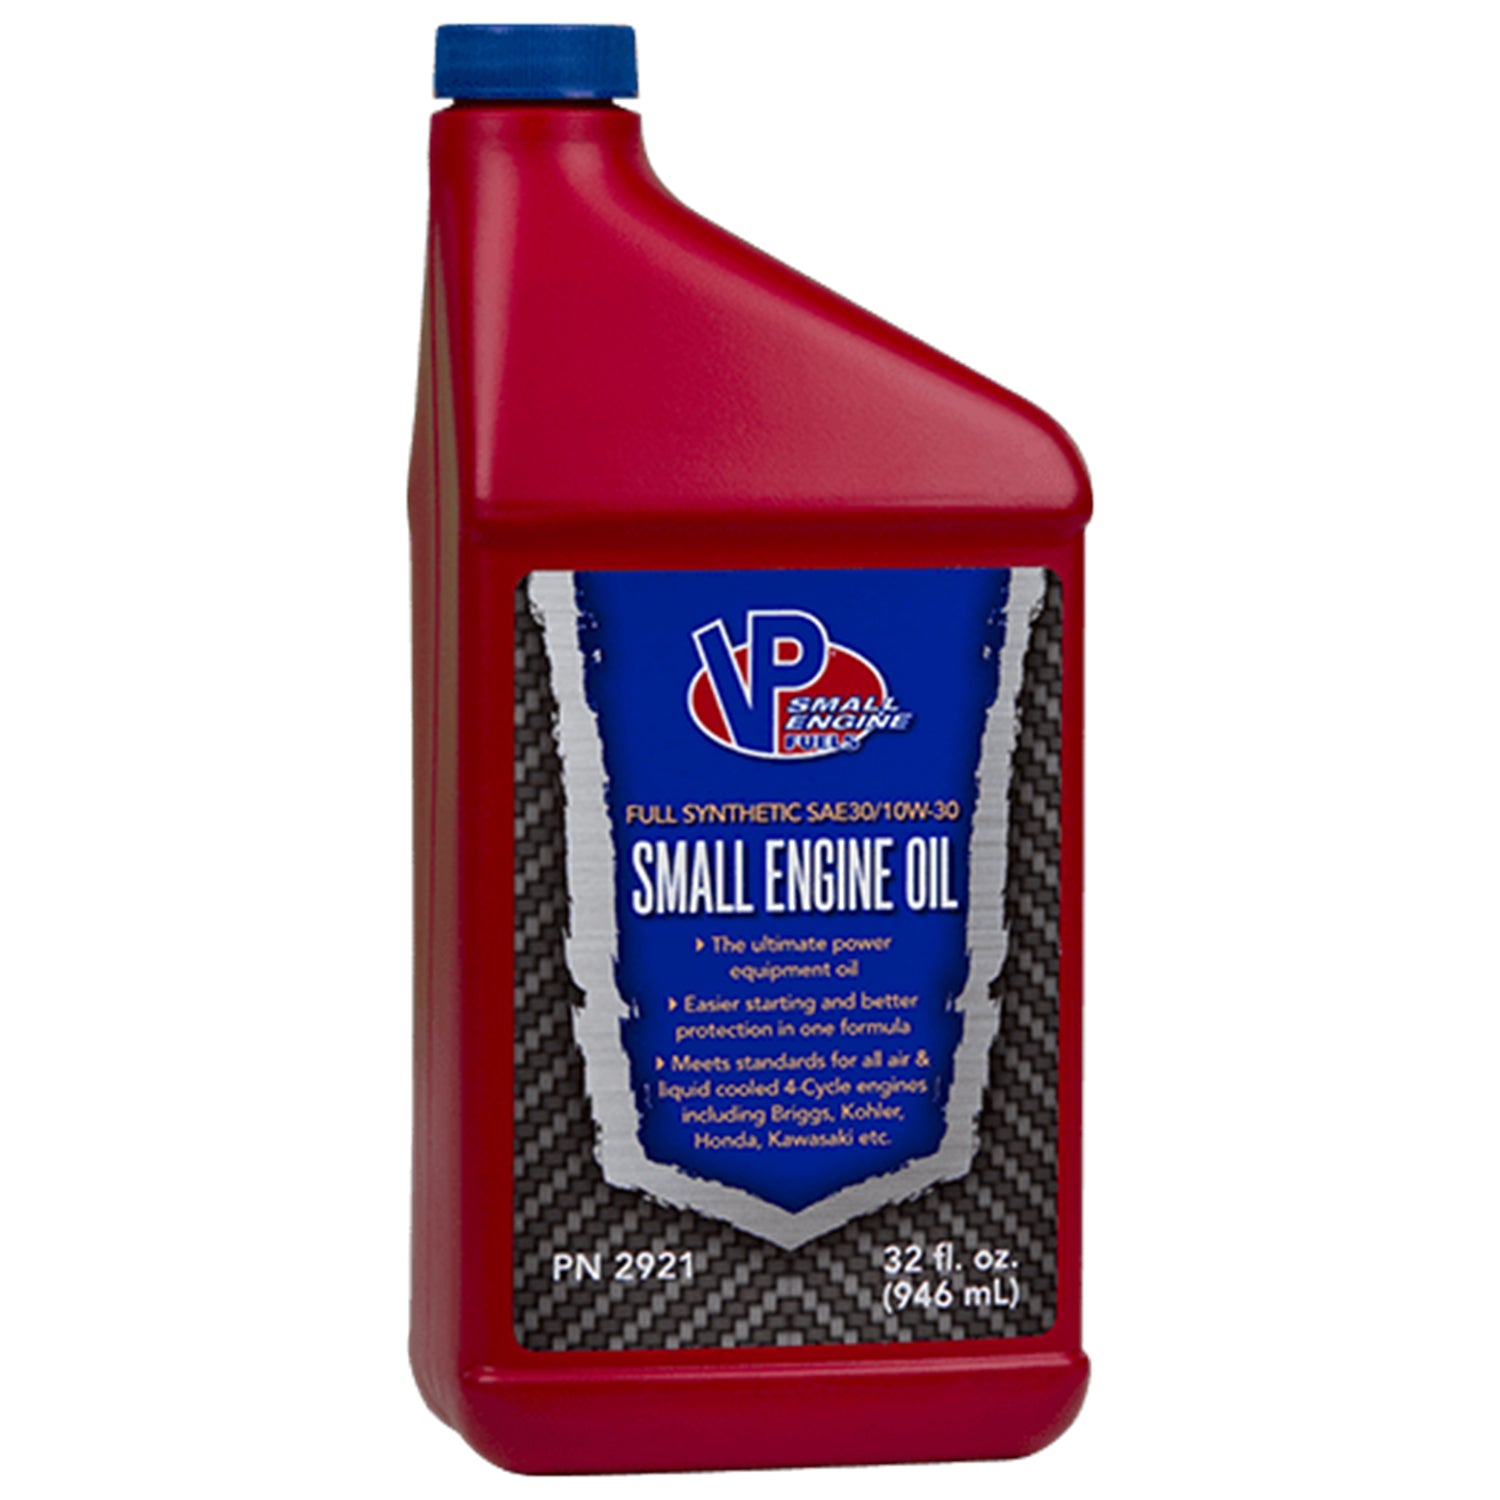 VP: 4-Cycle Engine Oil – SAE 30 / 10W30 Full Synthetic - Quart data-zoom=